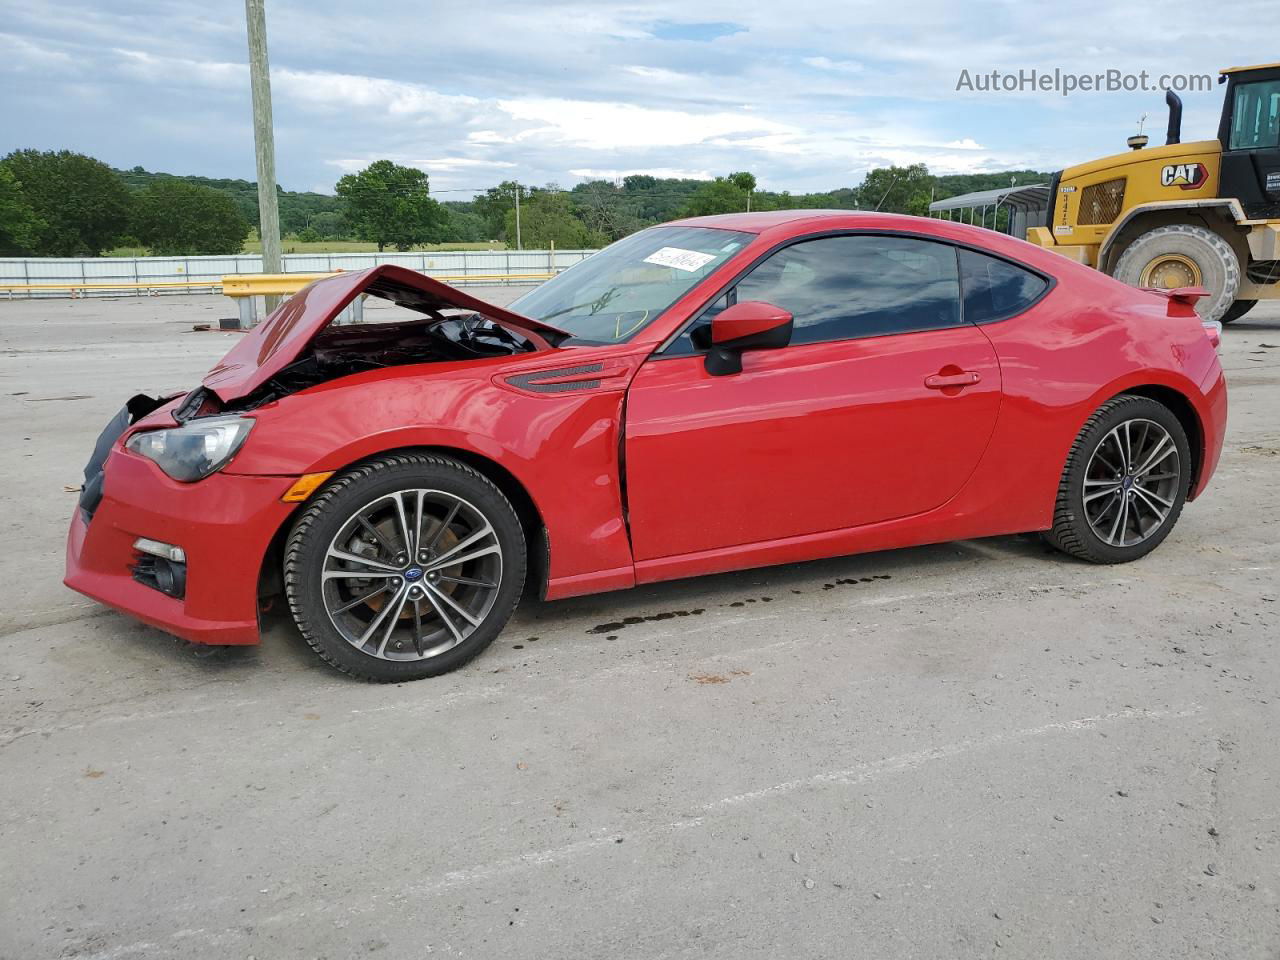 2014 Subaru Brz 2.0 Limited Red vin: JF1ZCAC14E9600702